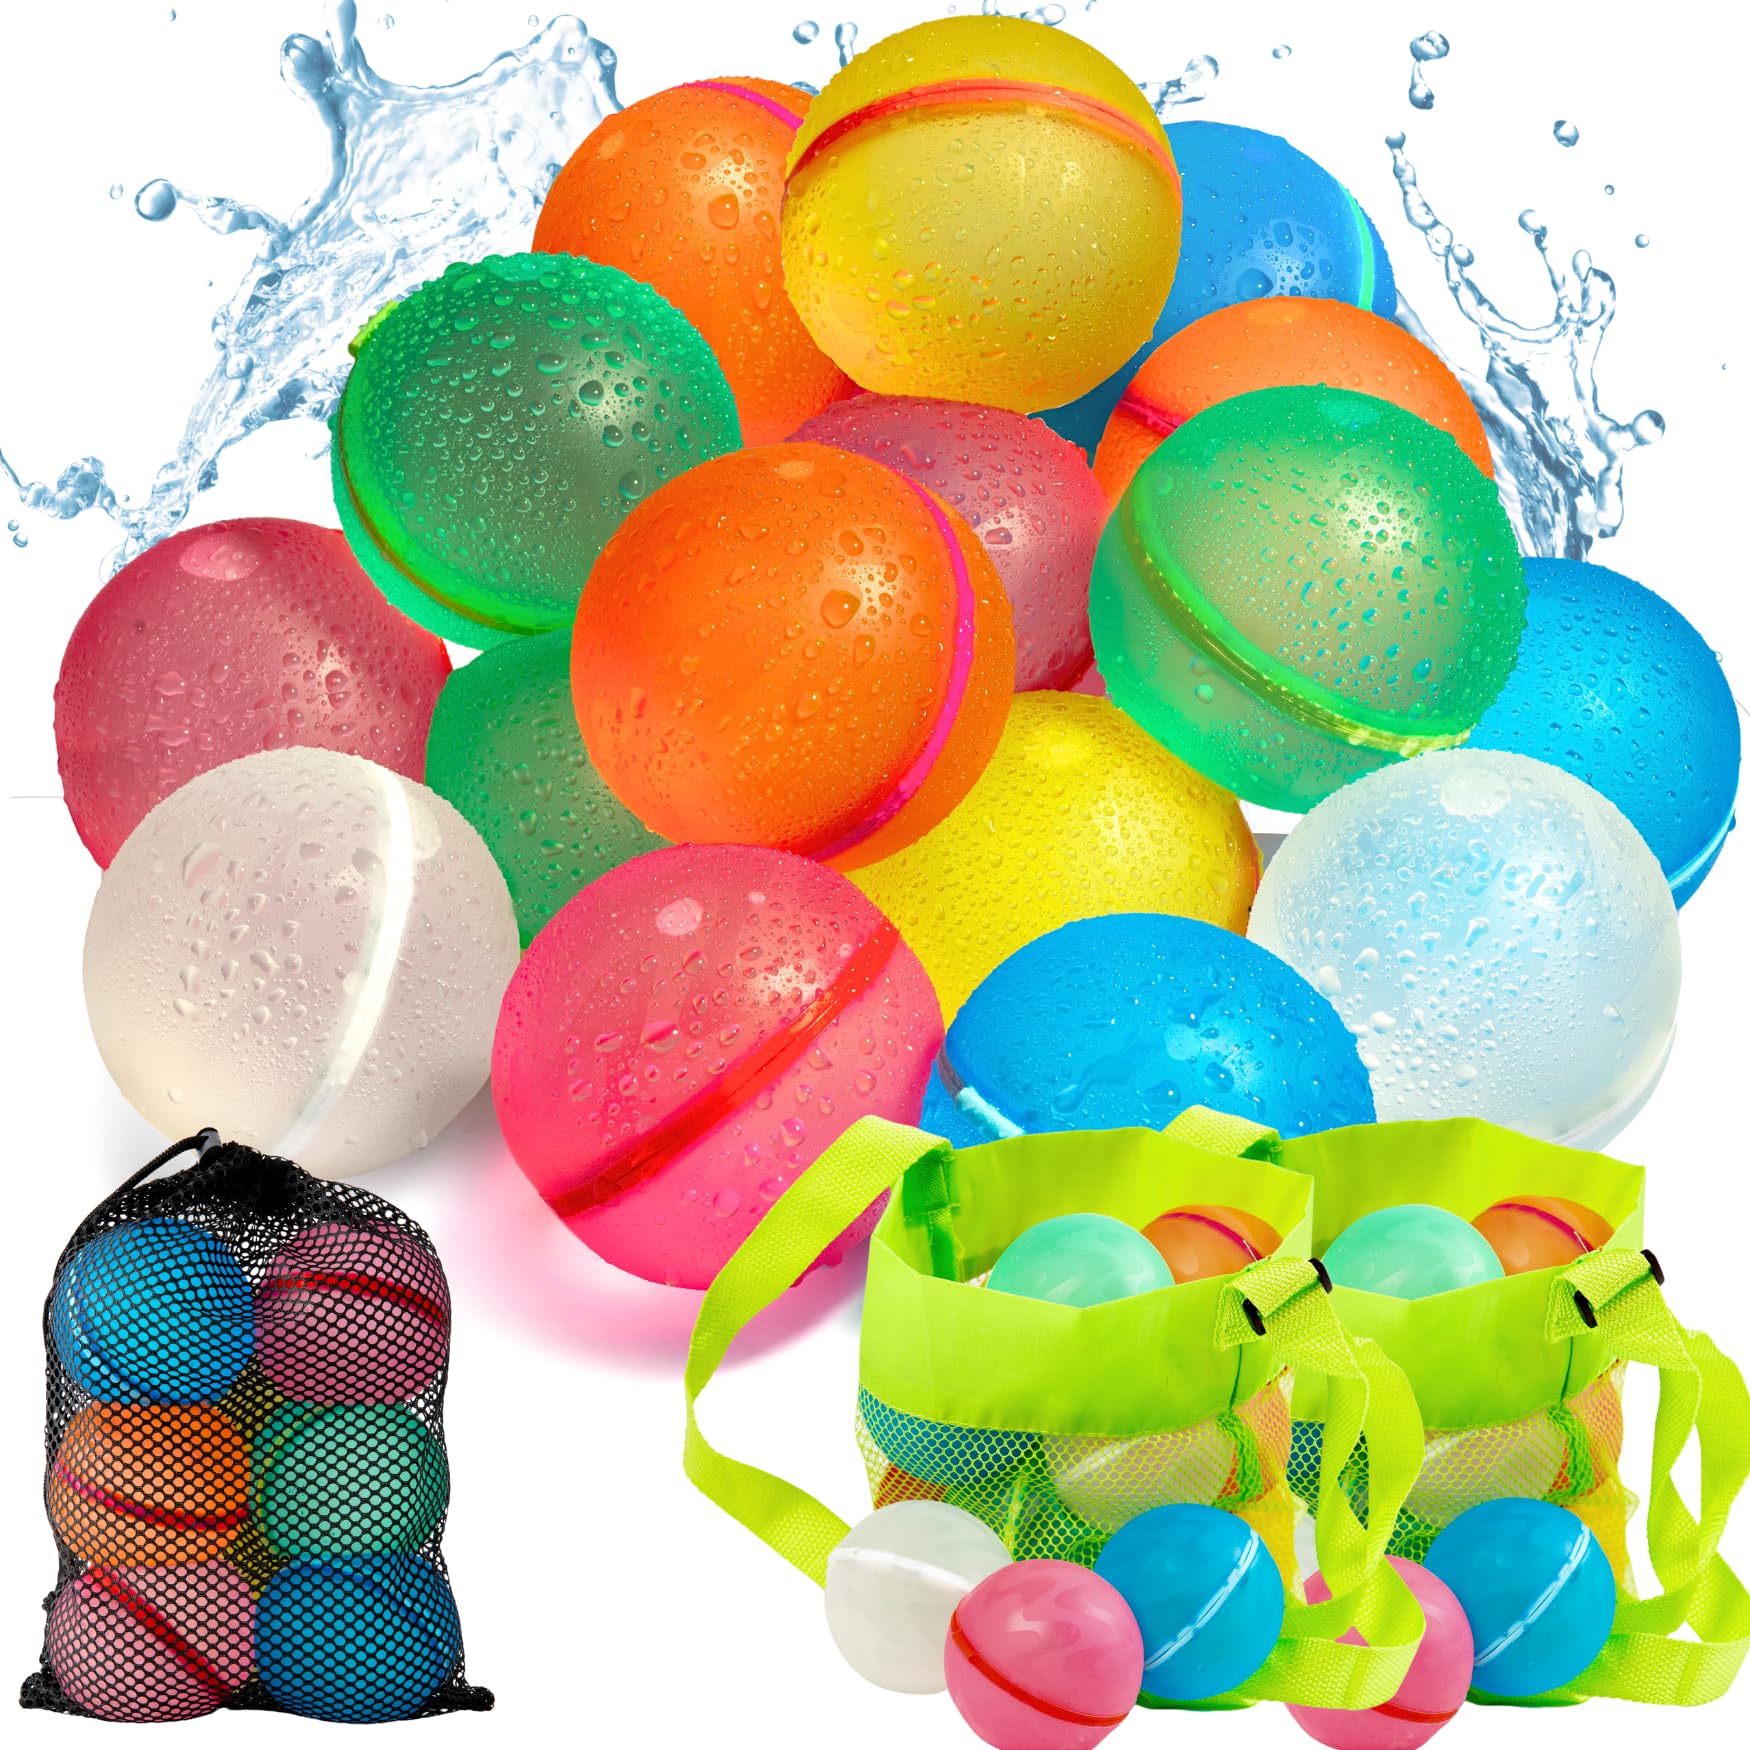 COLETA Reusable Water Balloons 16 Pcs Magnetic Self-Sealing. With 2 Side Bags. Refillable Latex-Free Soft Silicone Bombs Quick Fill Balls Boy Girl Gift Toy for Outdoor Activities Pool Beach Splash Fun